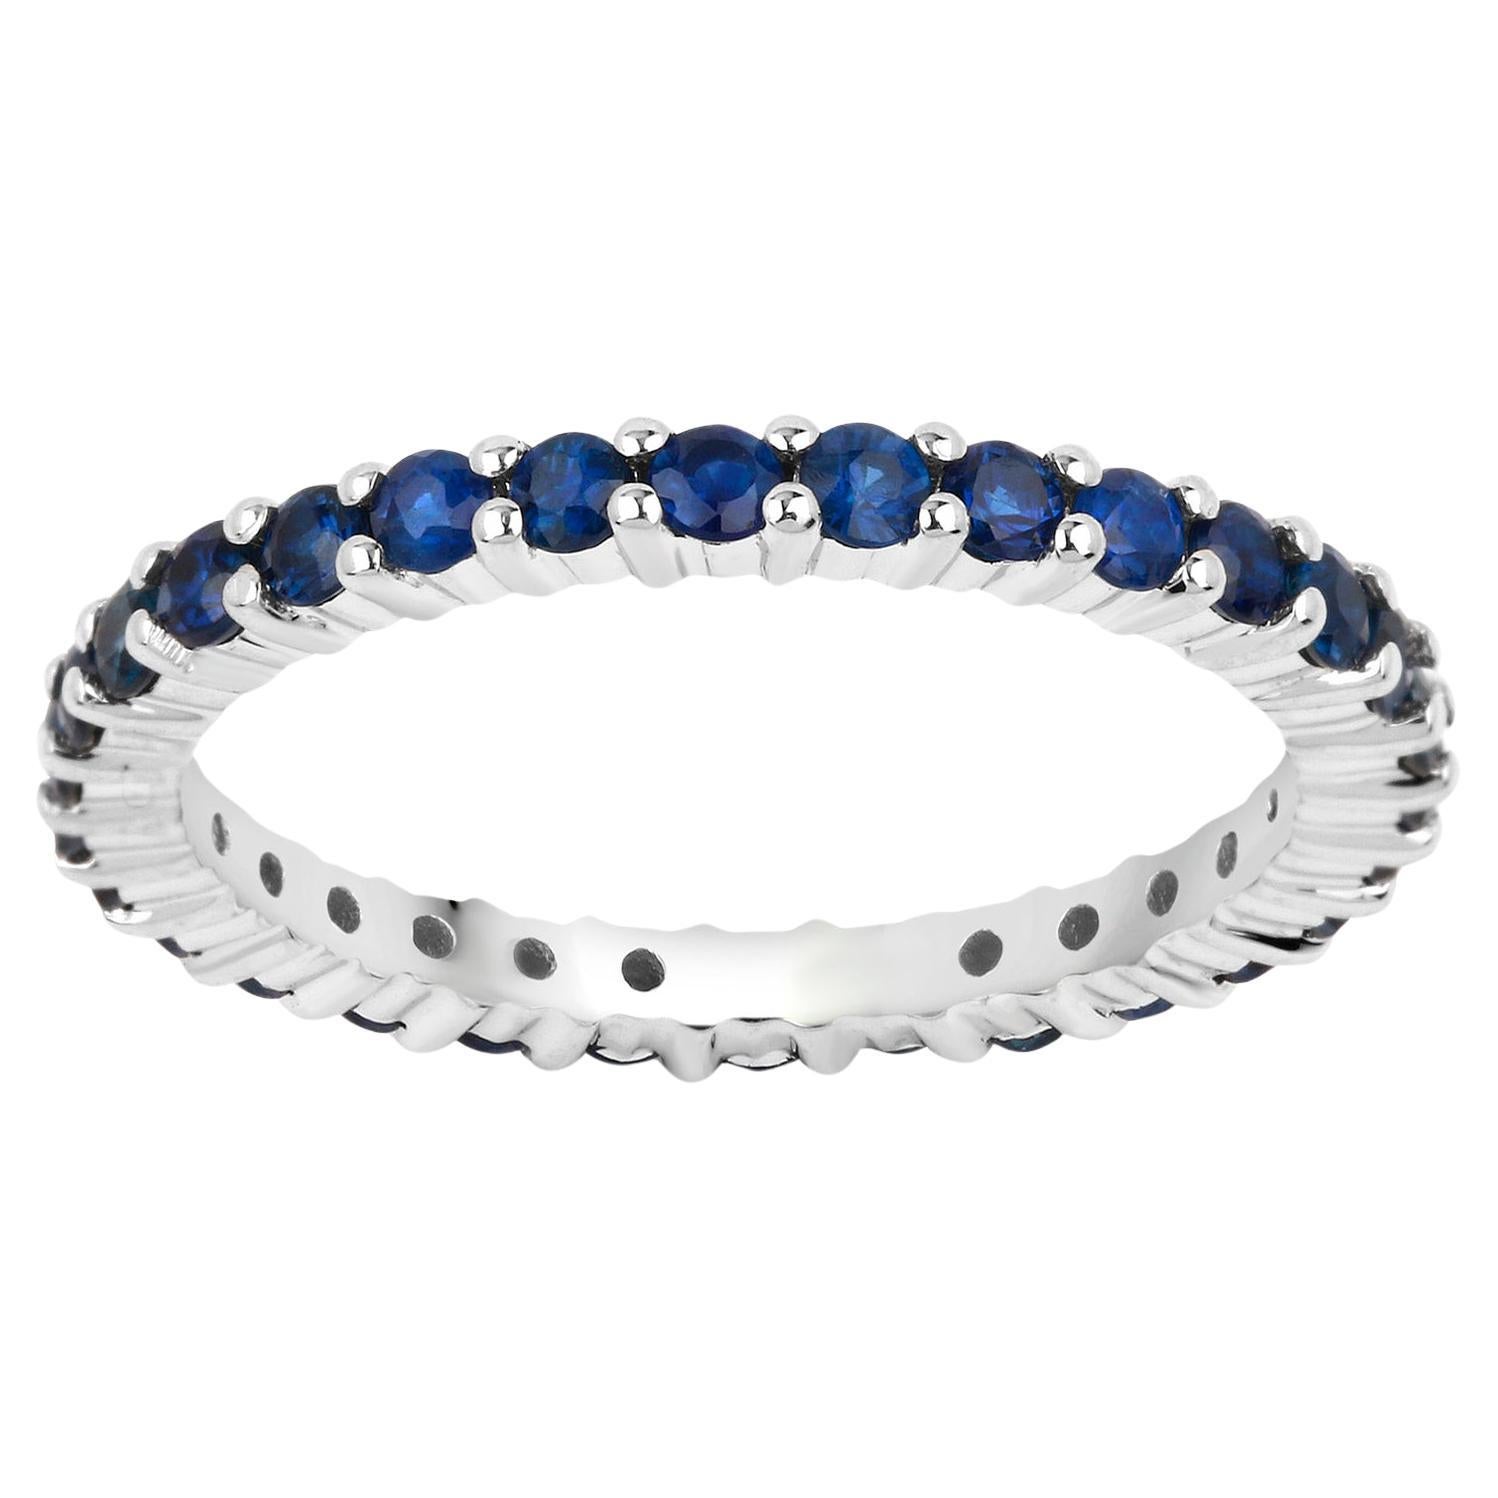 Blue Sapphire Eternity Band Ring 1.38 Carats 14K White Gold